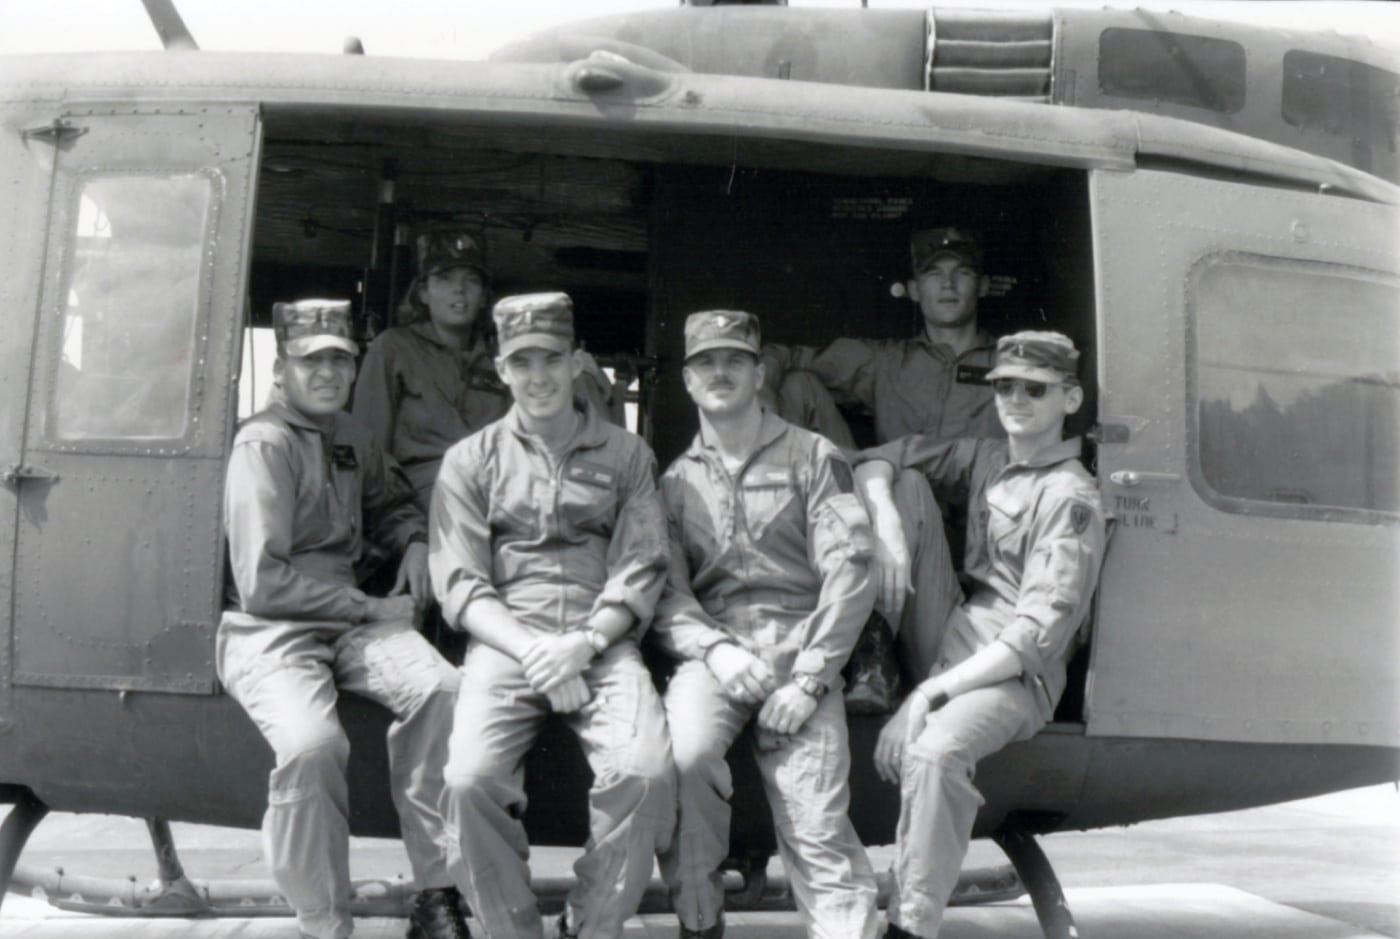 author at US Army rotary wing flight school in UH-1H helicopter